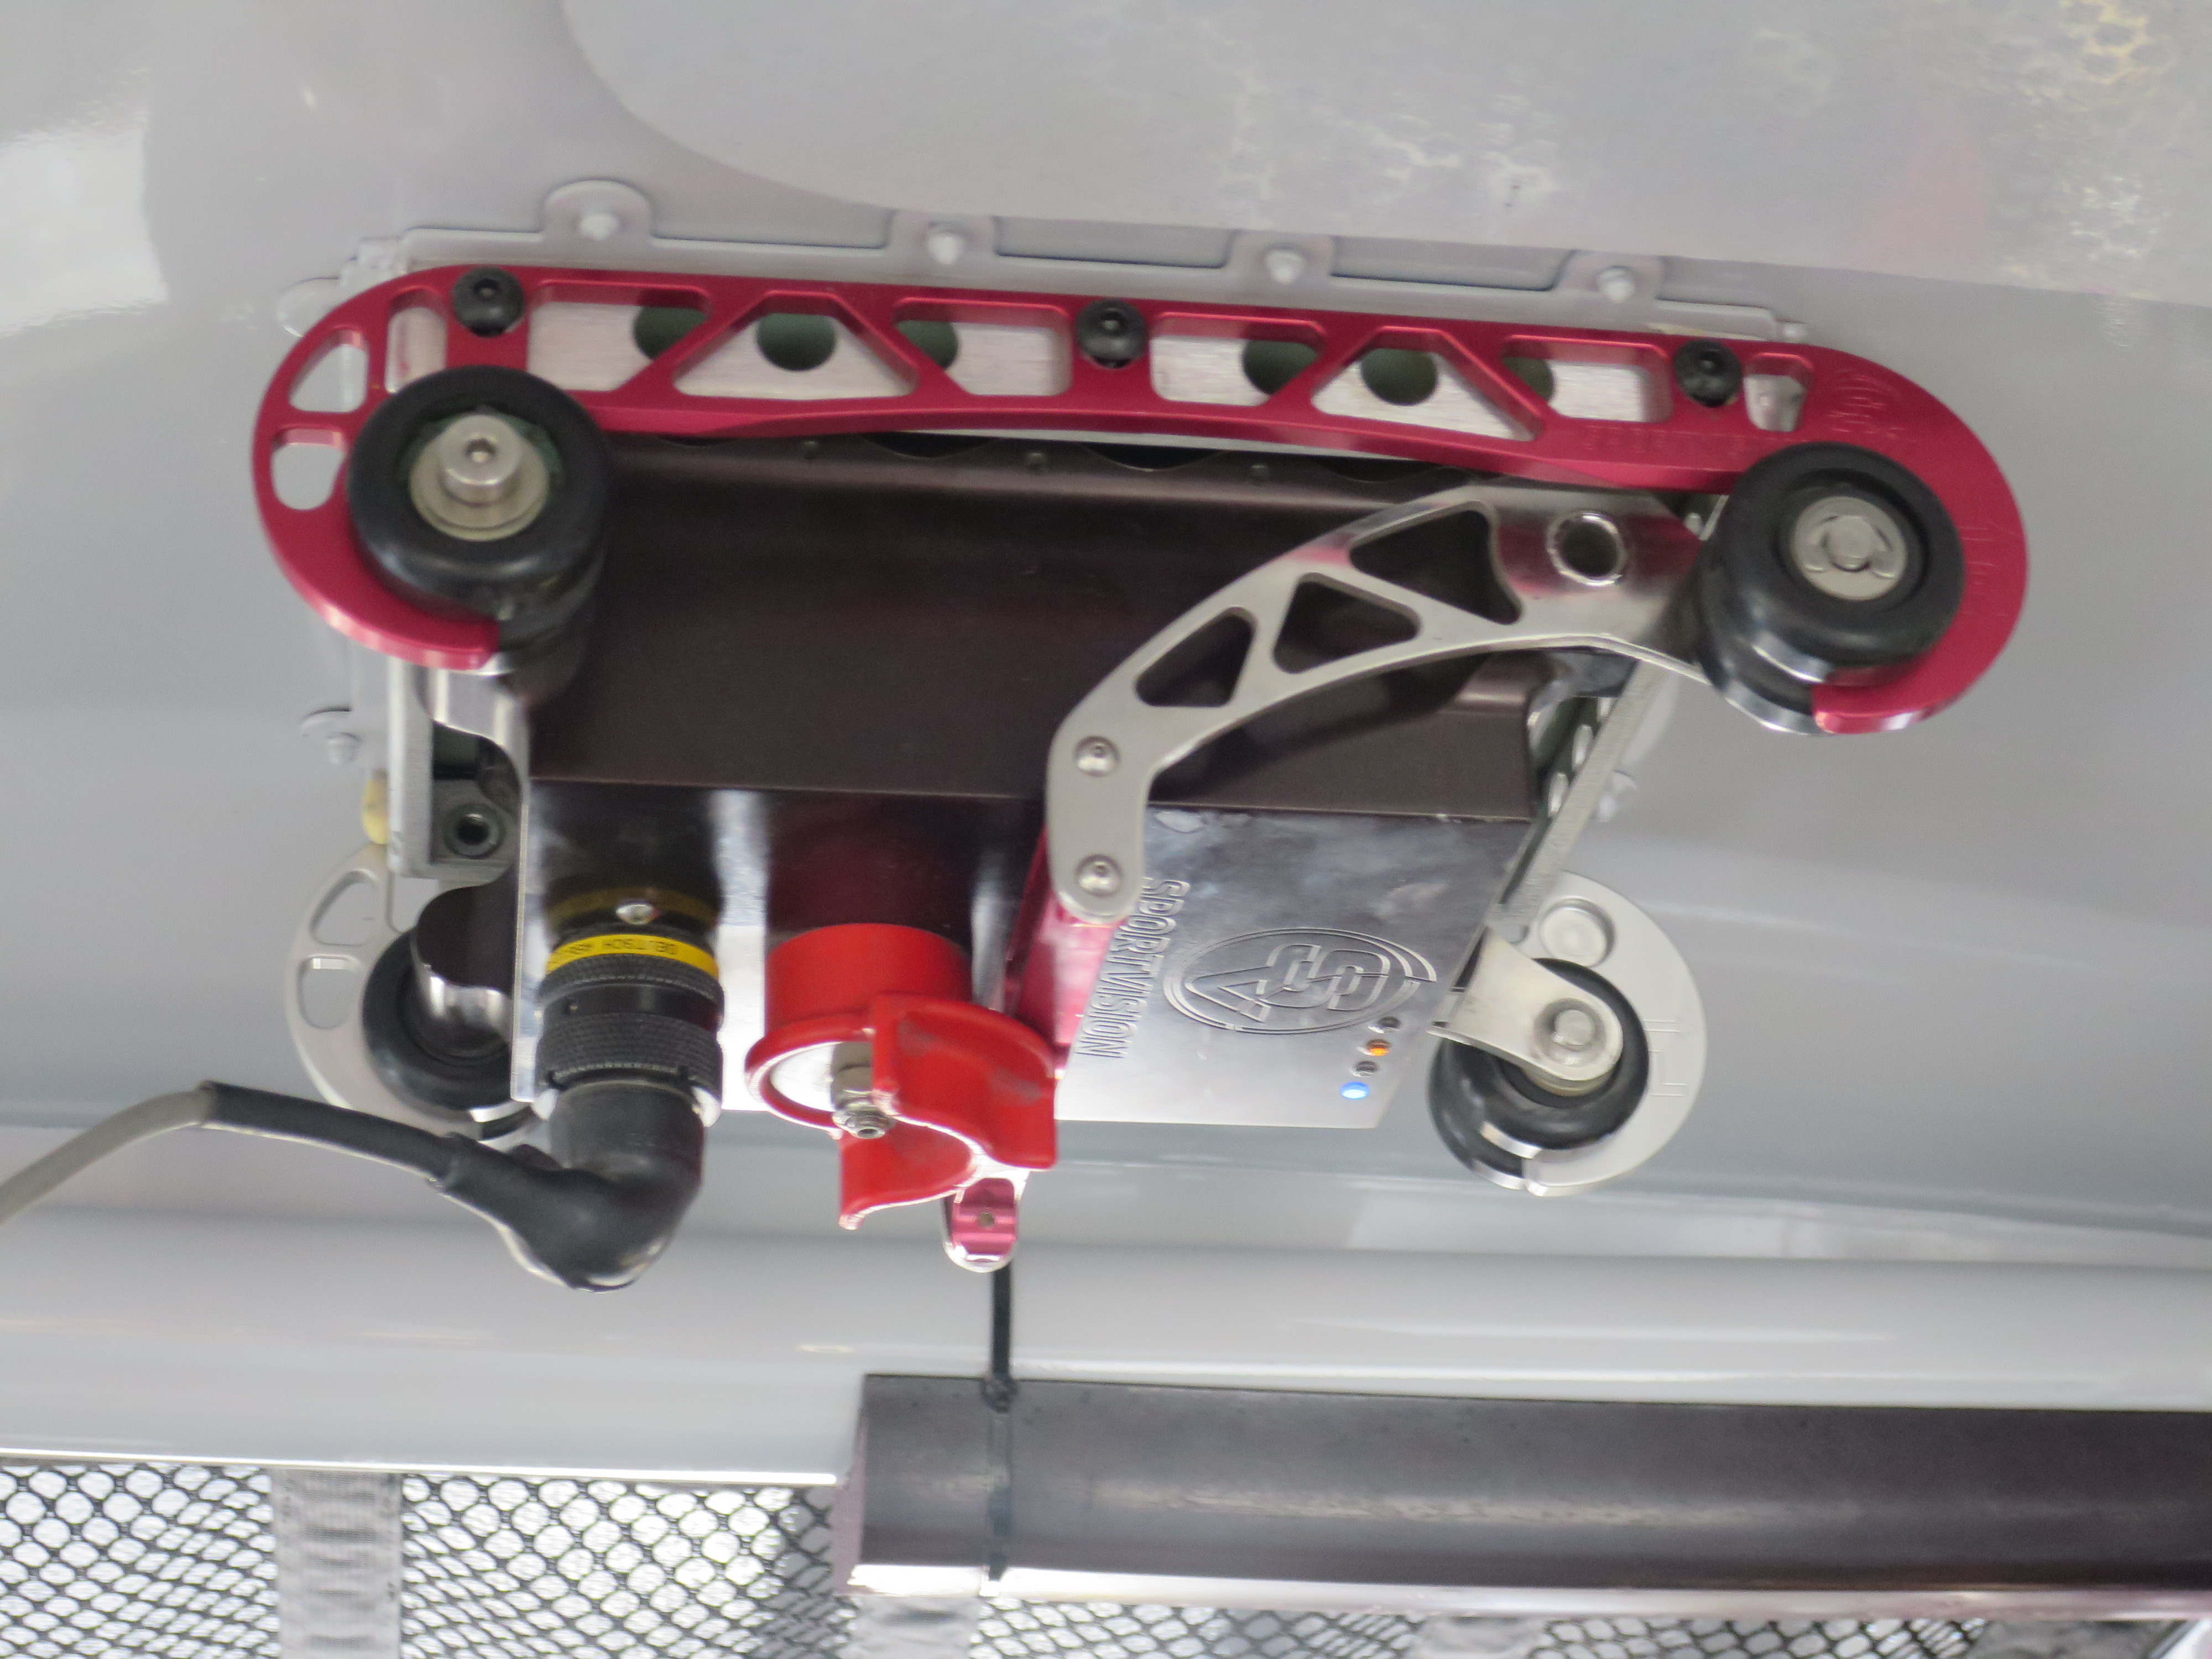 A small onboard computer is mounted to the inside of the roof of the race cars.